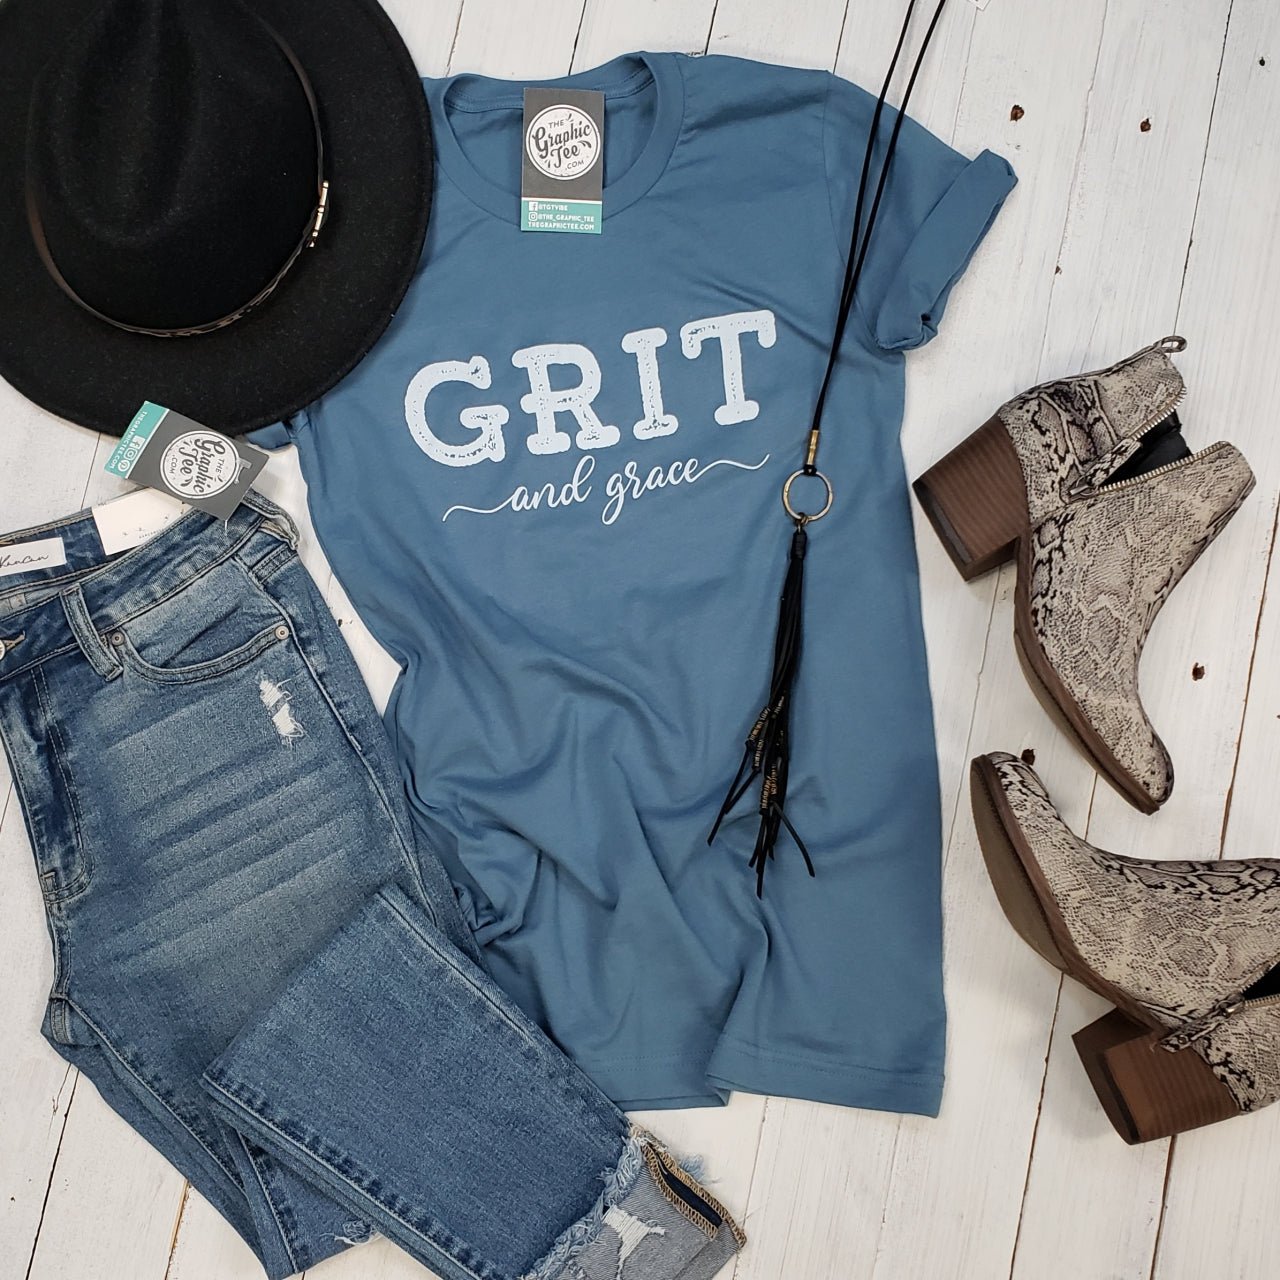 Grit And Grace Unisex Tee - The Graphic Tee